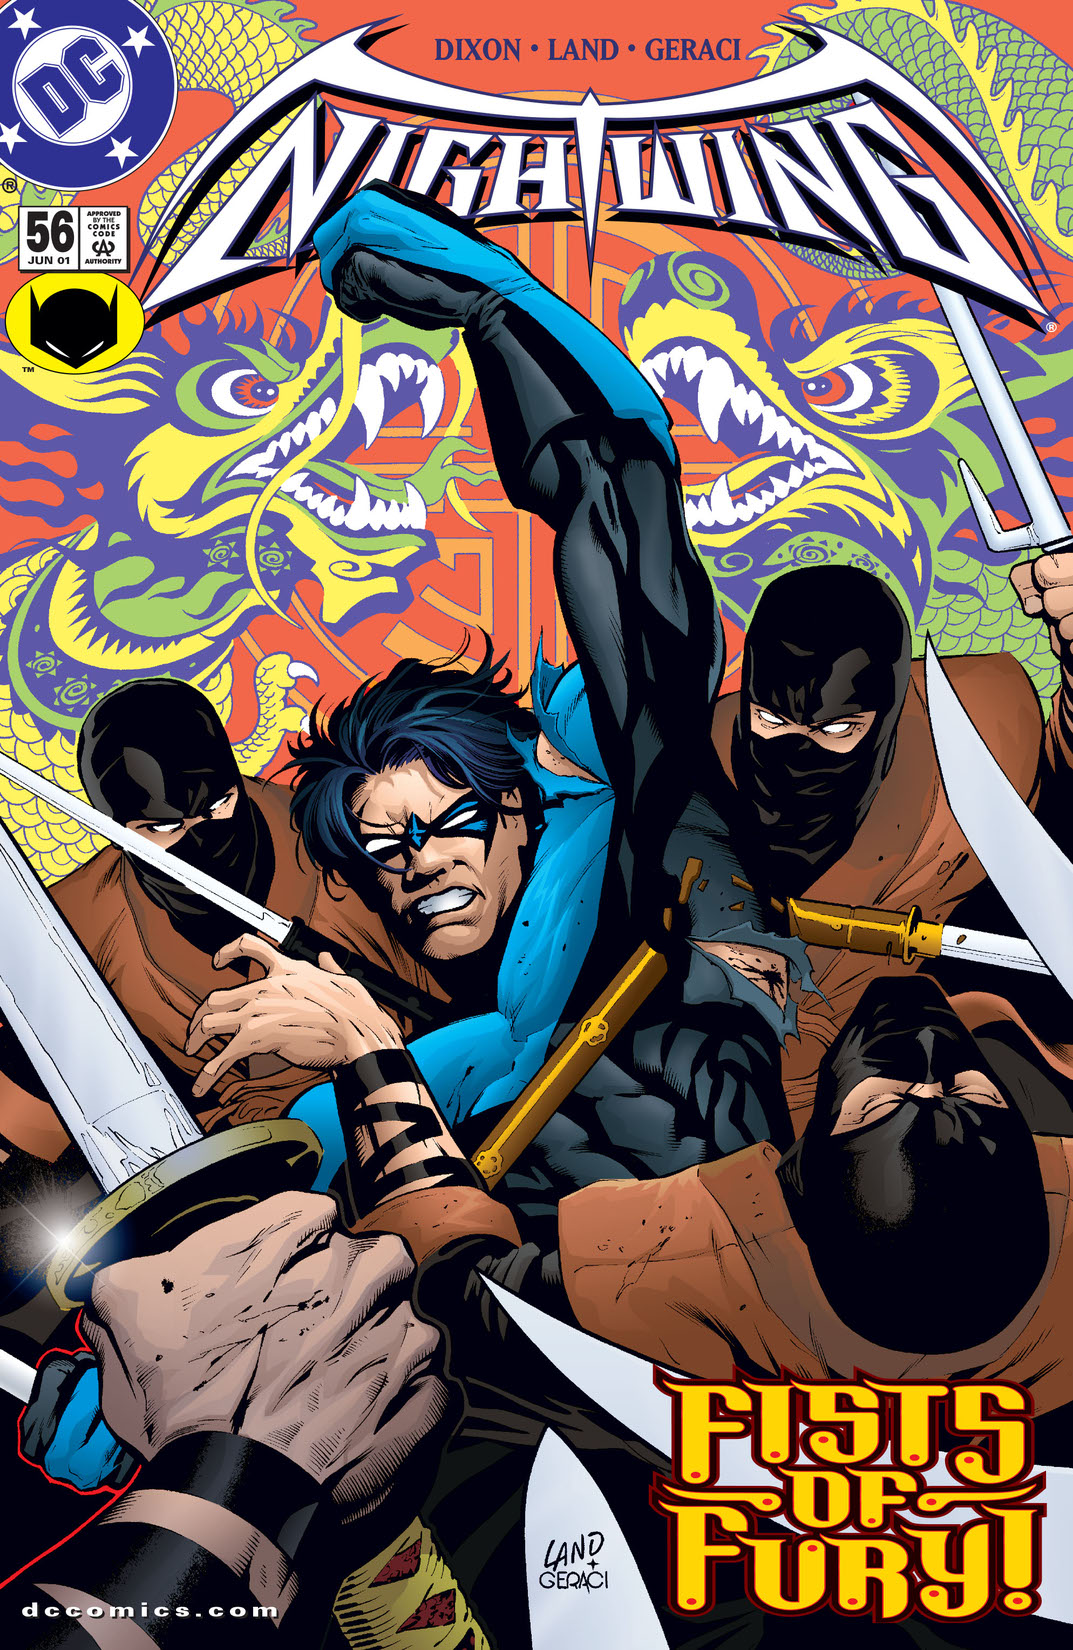 Nightwing (1996-) #56 preview images